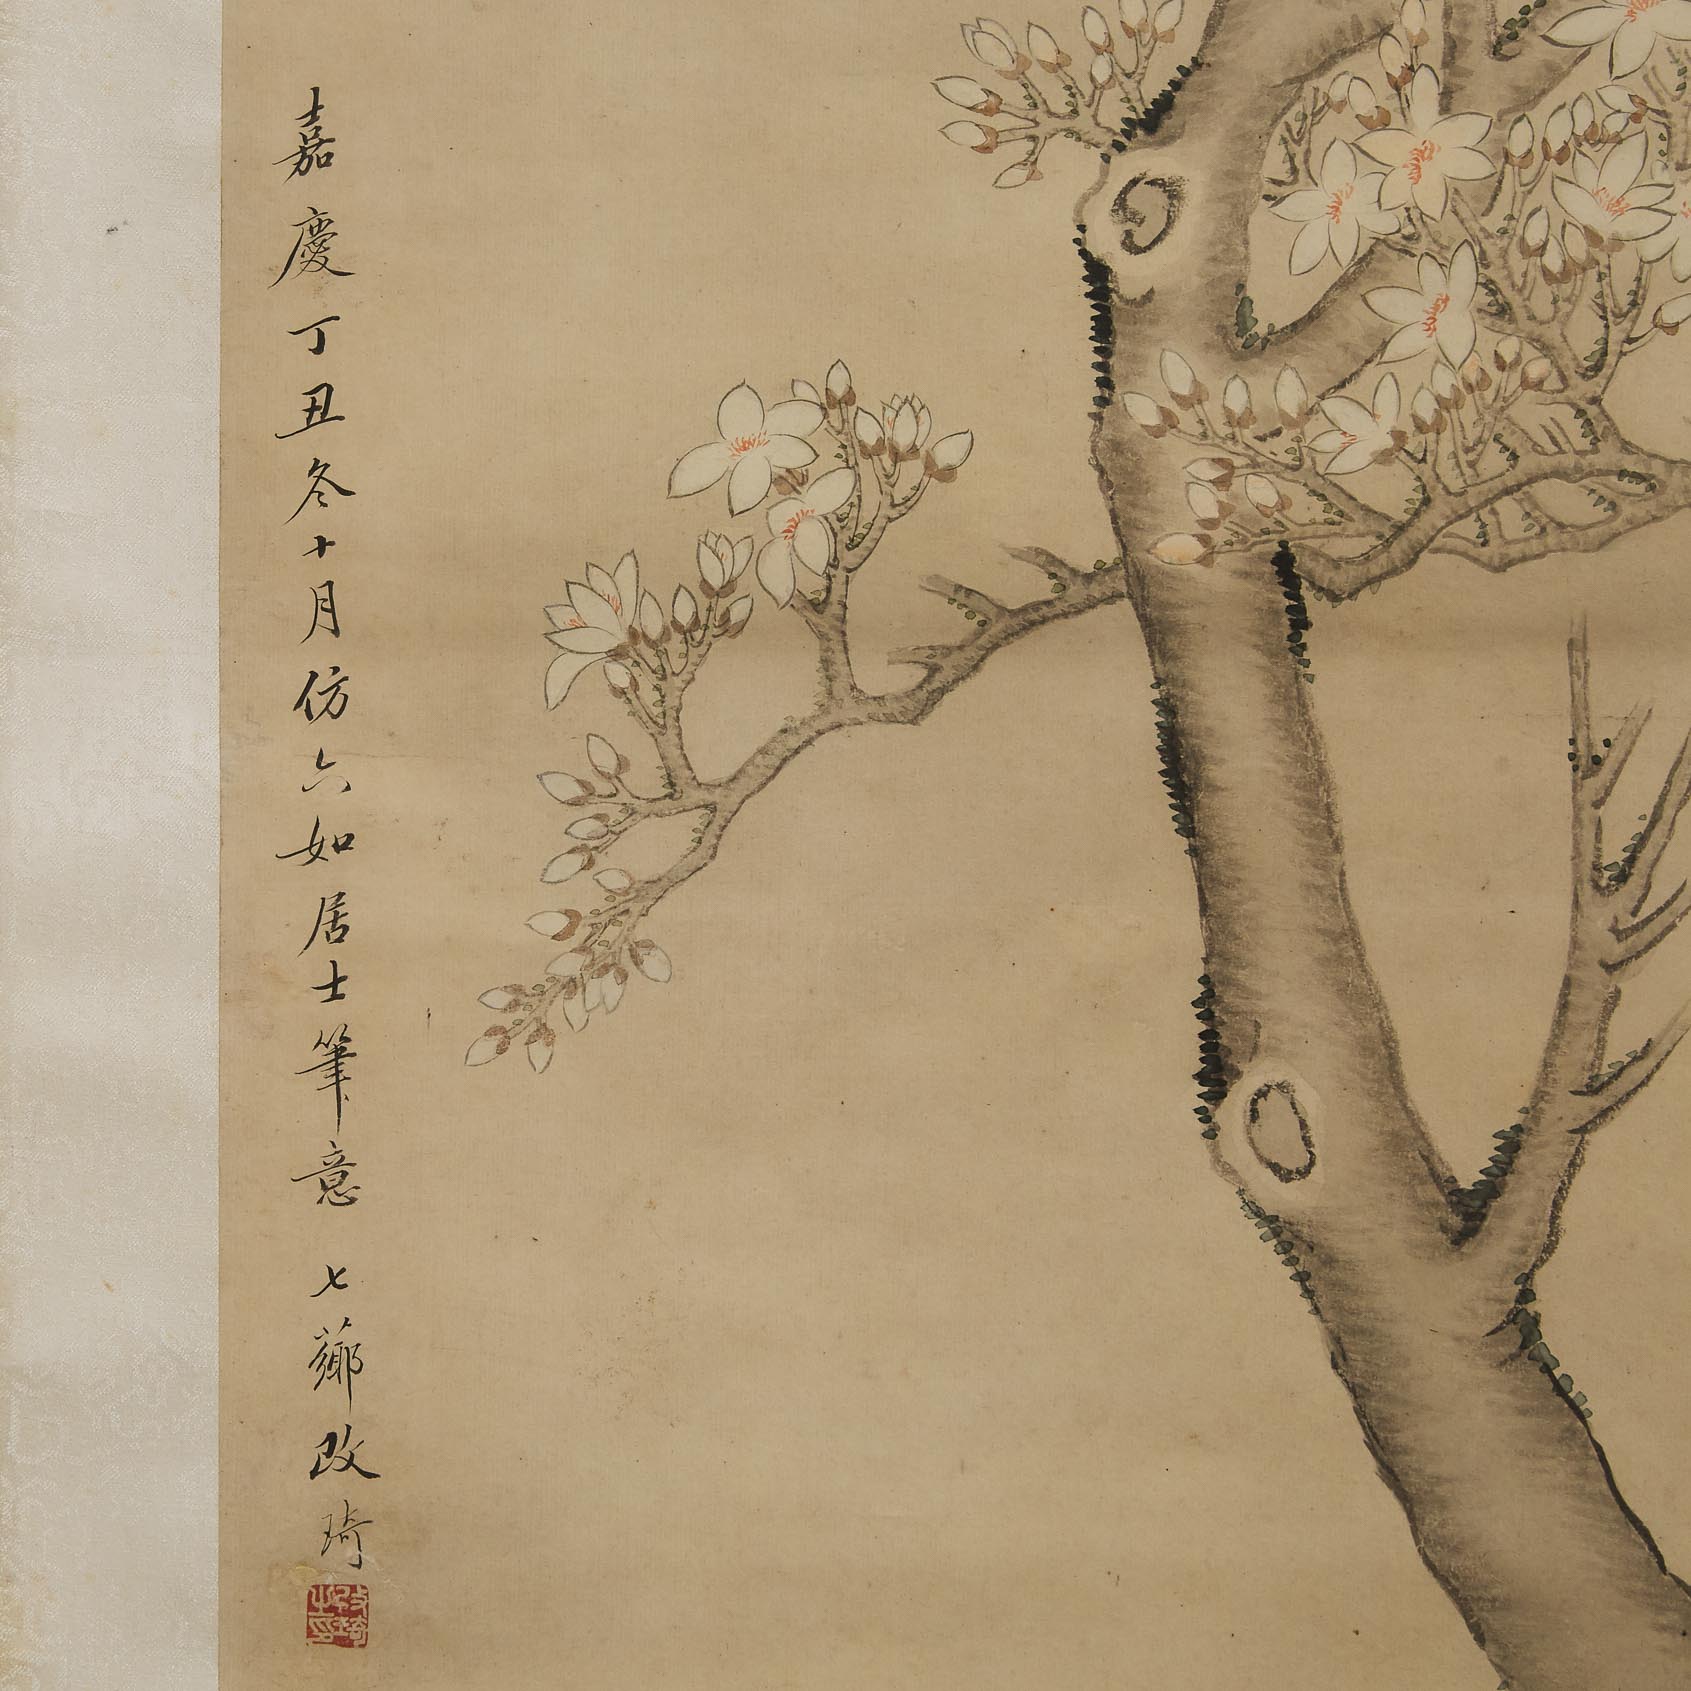 Attributed to Gai Qi (1773-1828), Musician and Lady